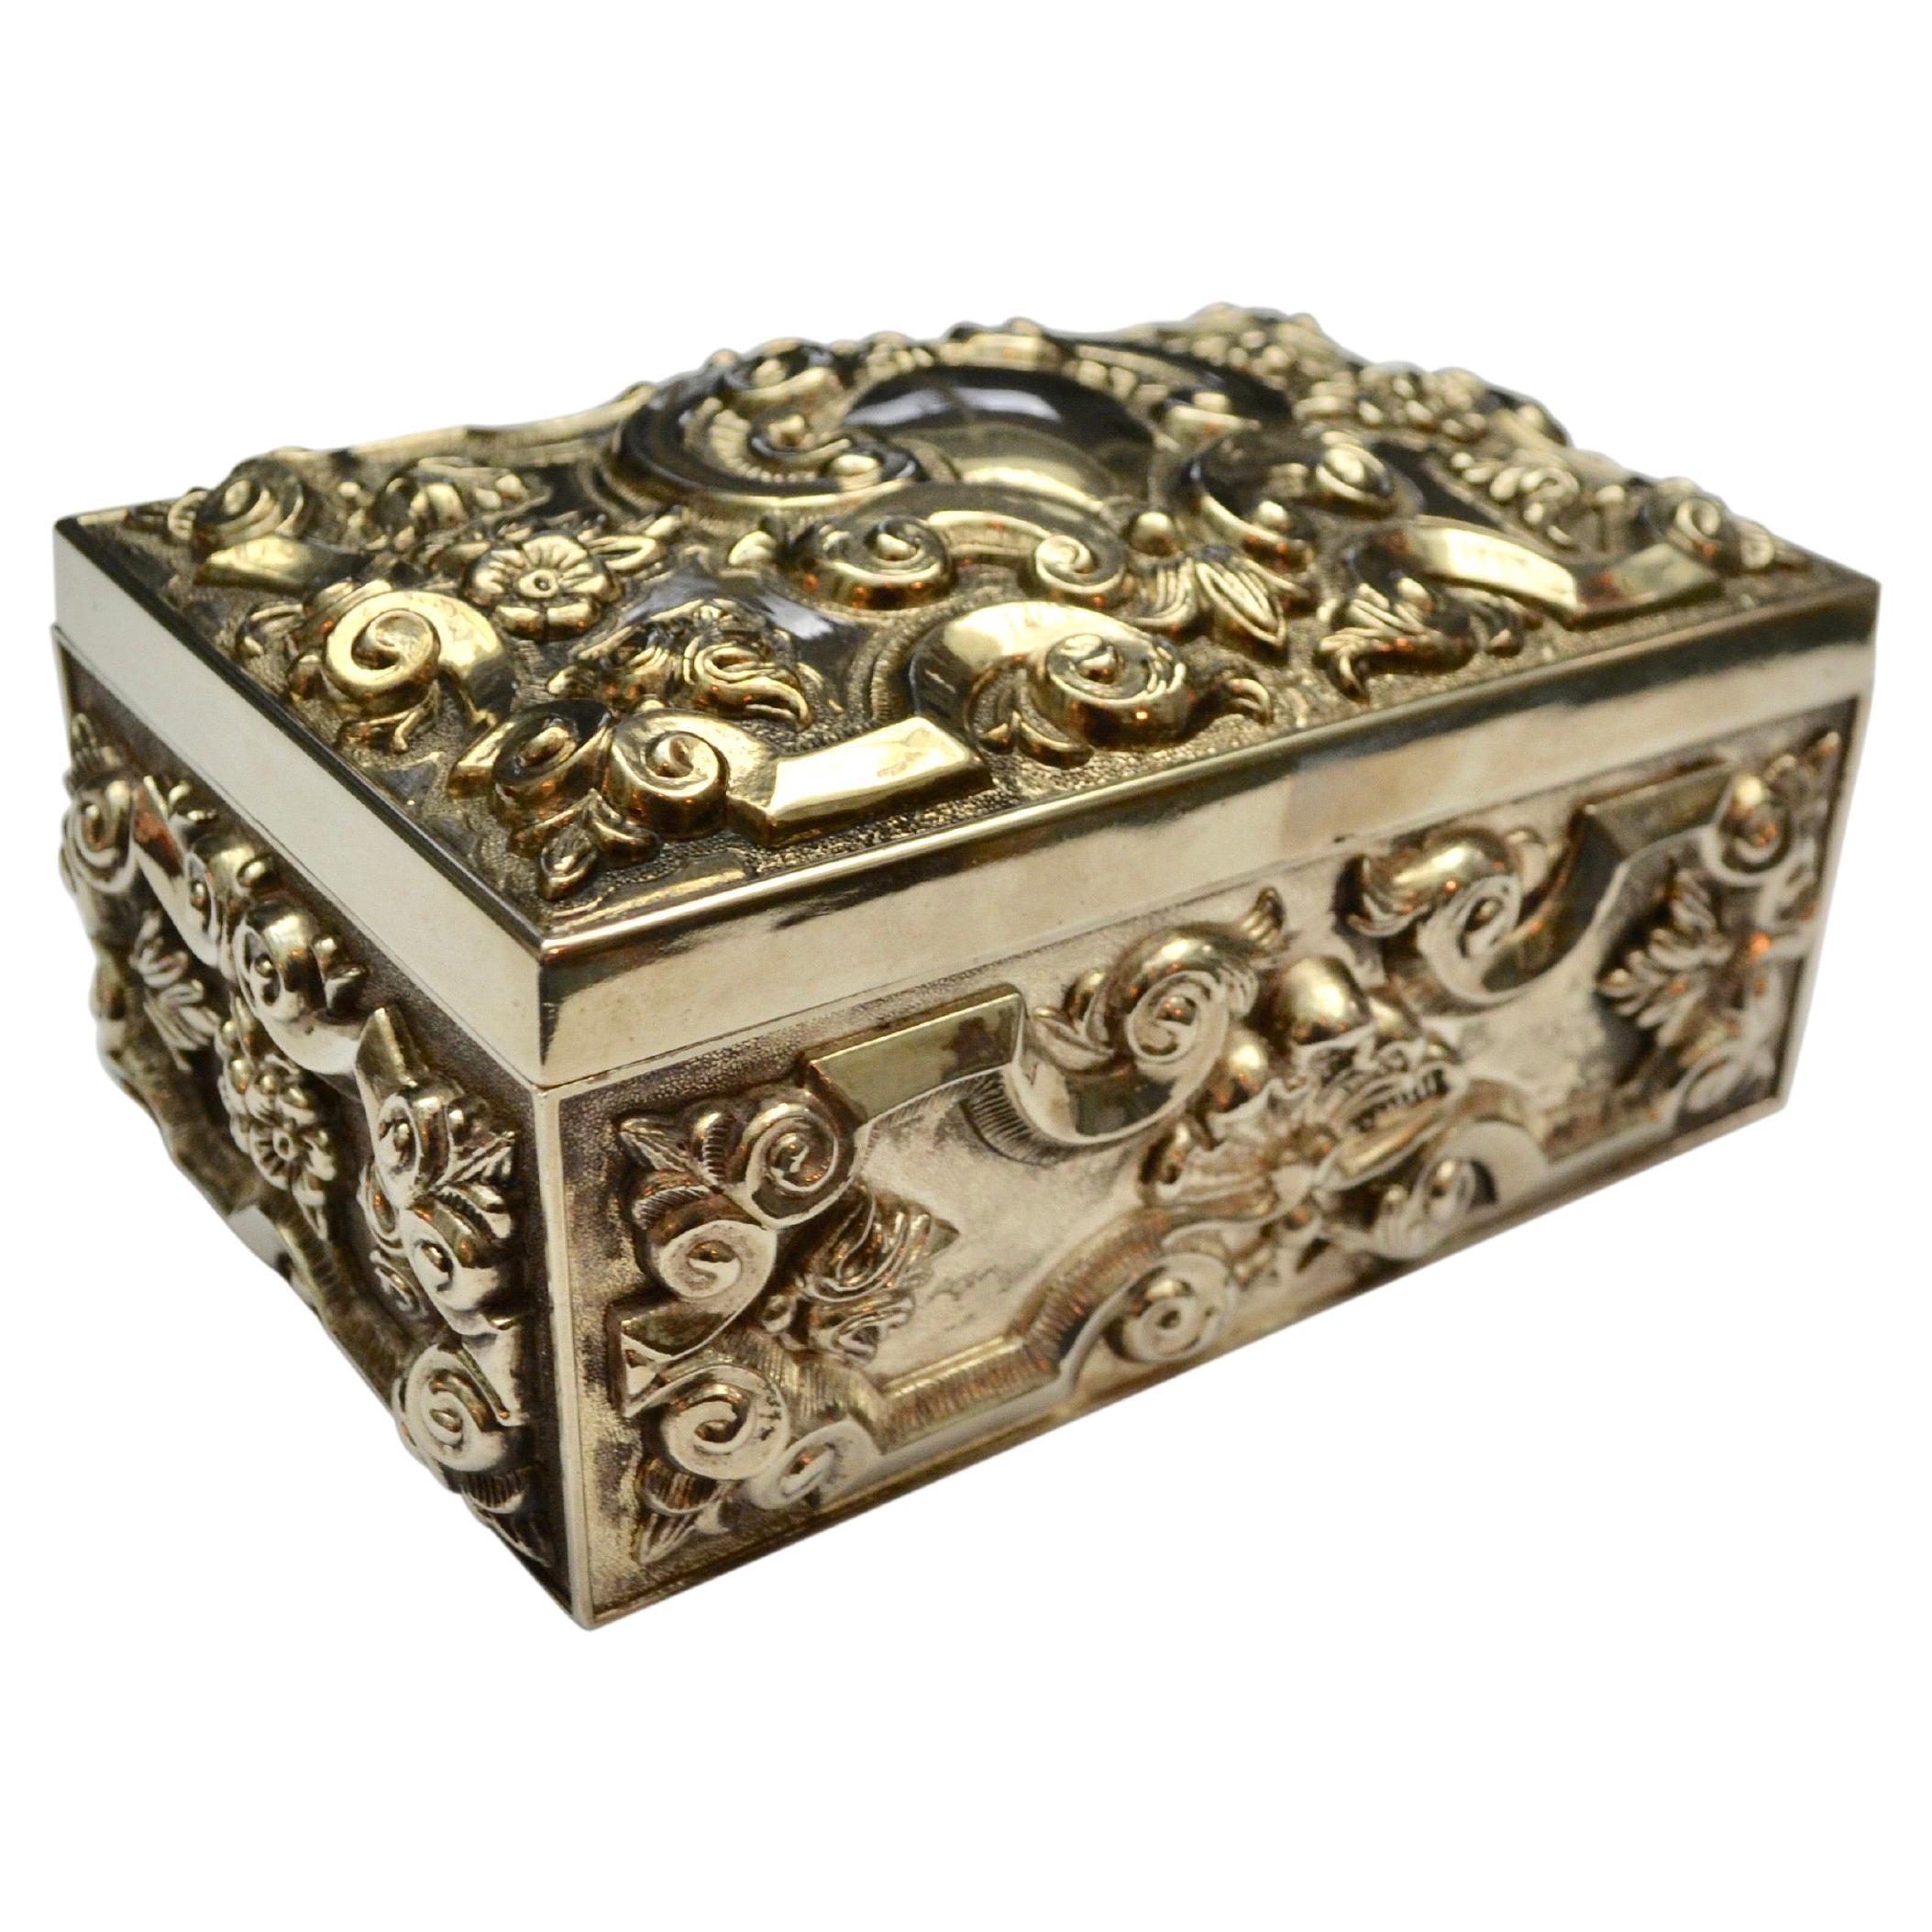 Siiver Plated Renaissance Revival Style Jewellery Box  For Sale